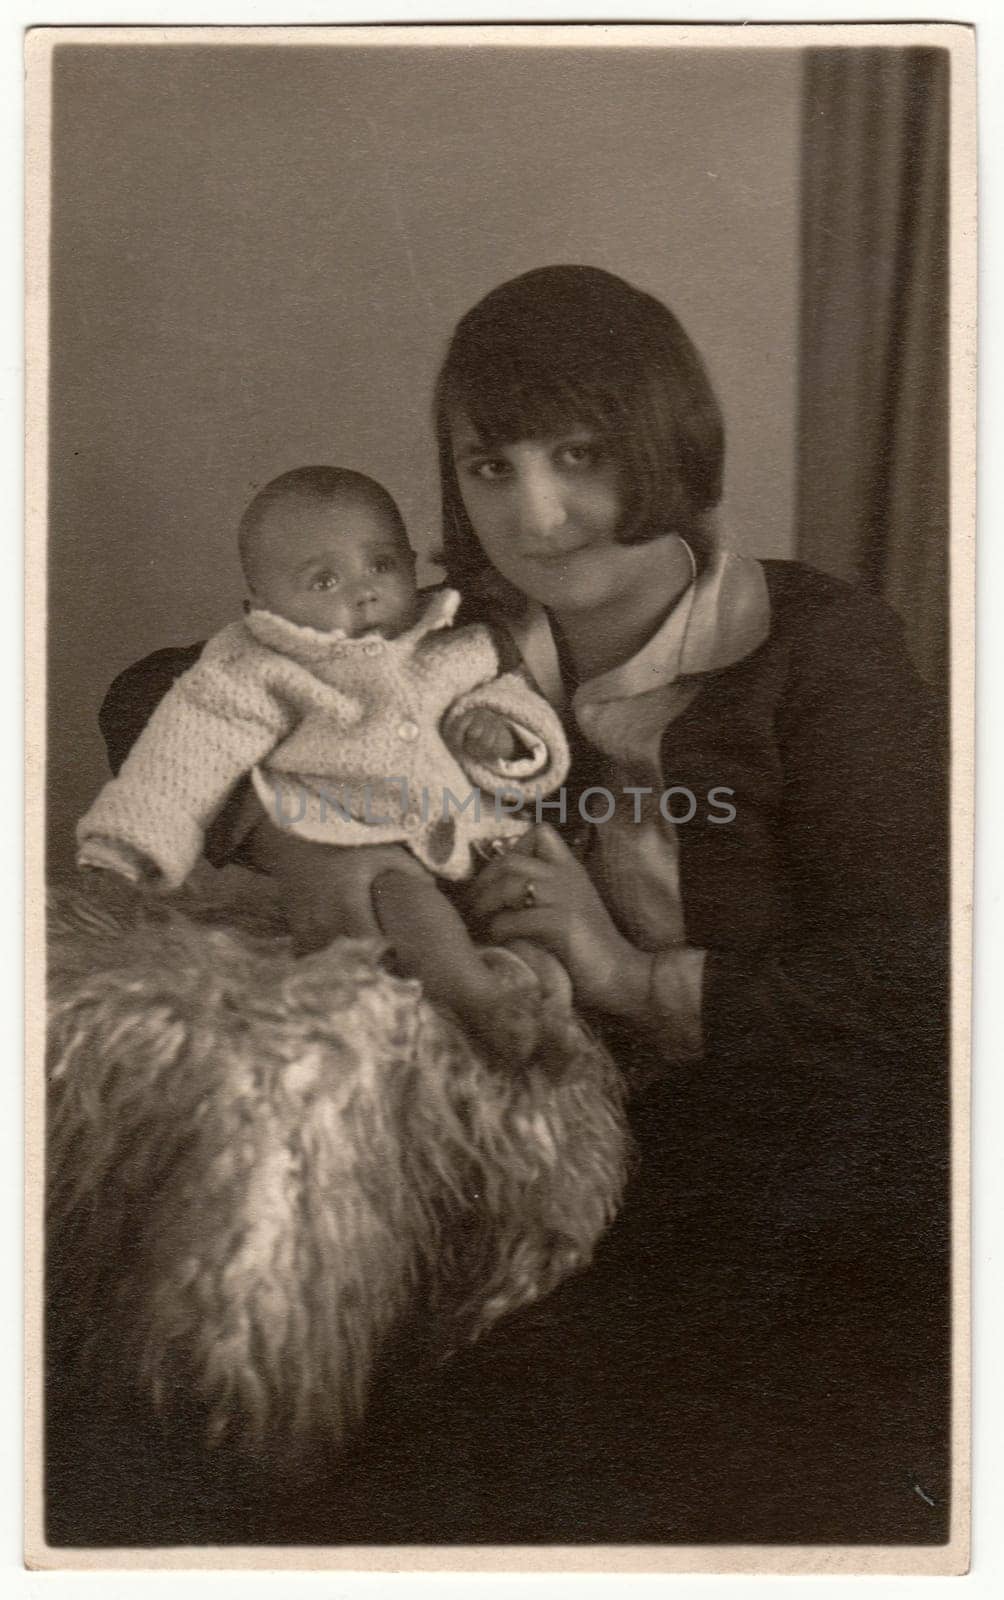 Vintage photo shows woman with baby - newborn. Retro black and white studio photography. by roman_nerud